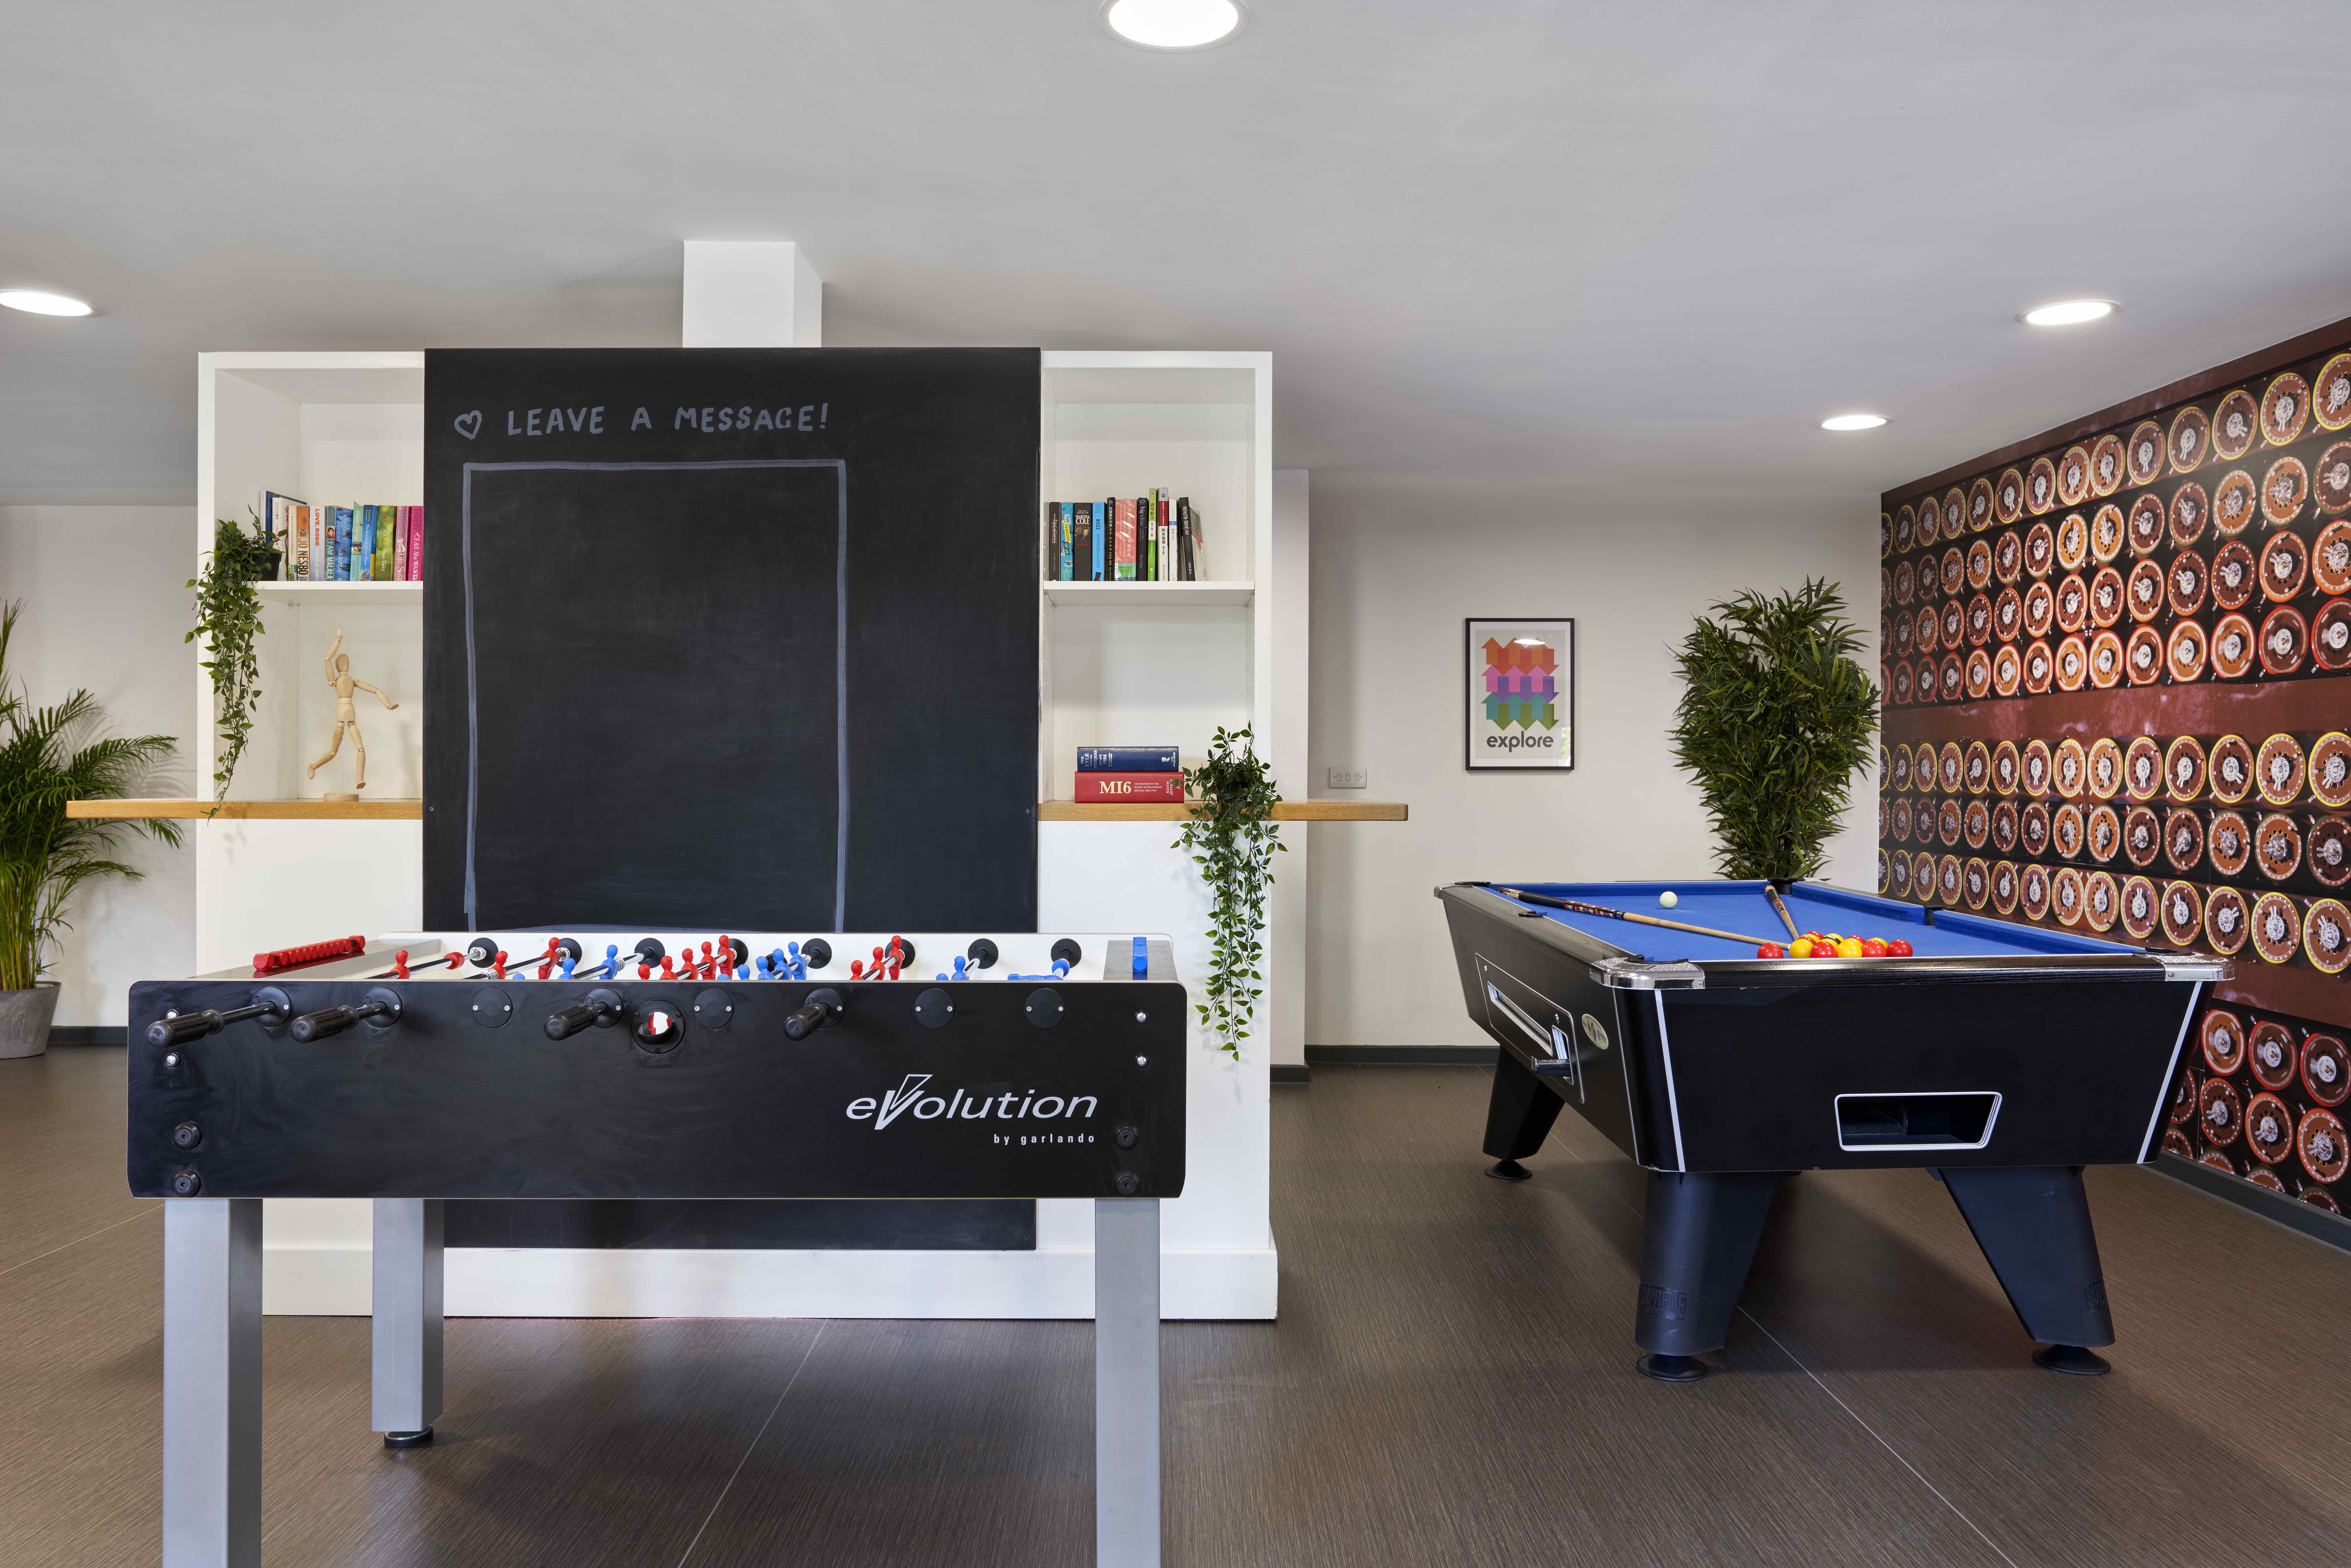 Leeds student accommodation games area